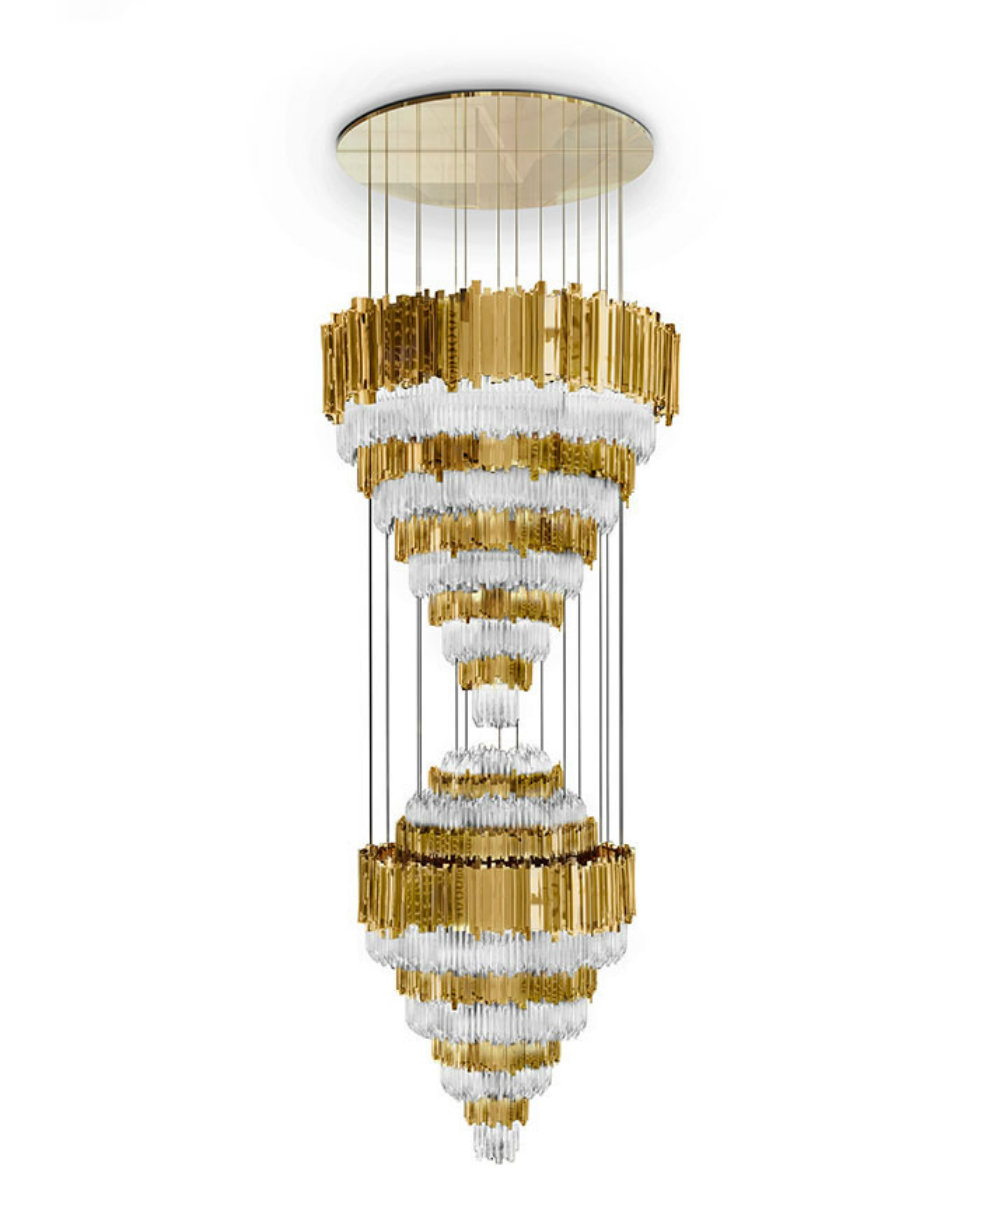 Euroluce 2019 Presents For The First Time XL Chandelier